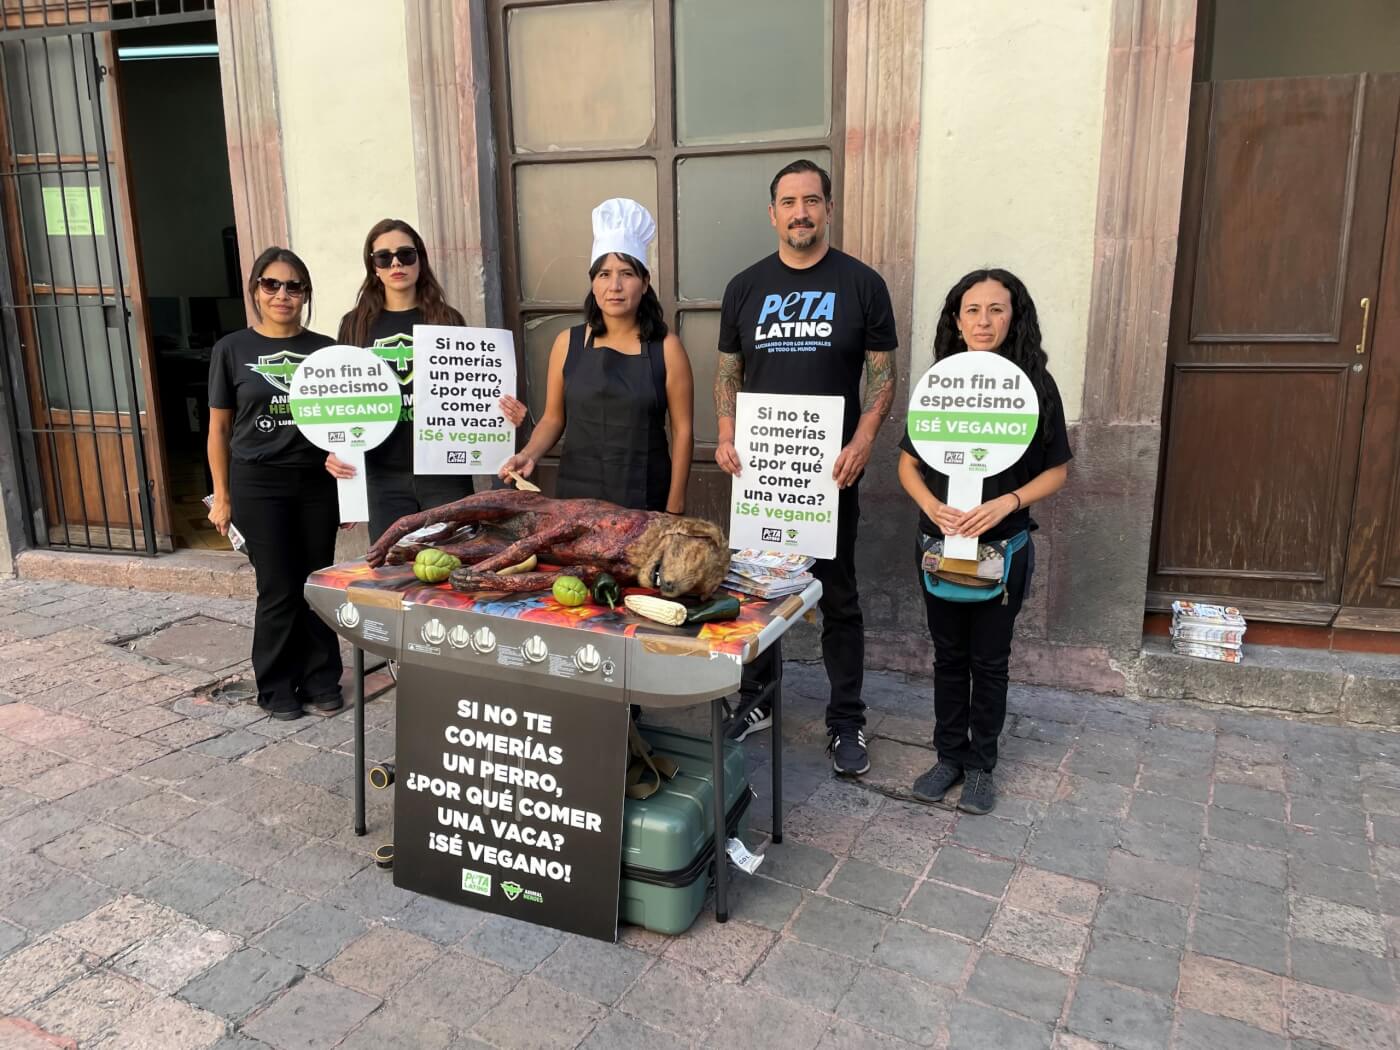 five people in animal heroes and peta latino shirts standing in front of a building. in front of them is a mock grill with a realistic prop dog, which appears to be skinned and charred.